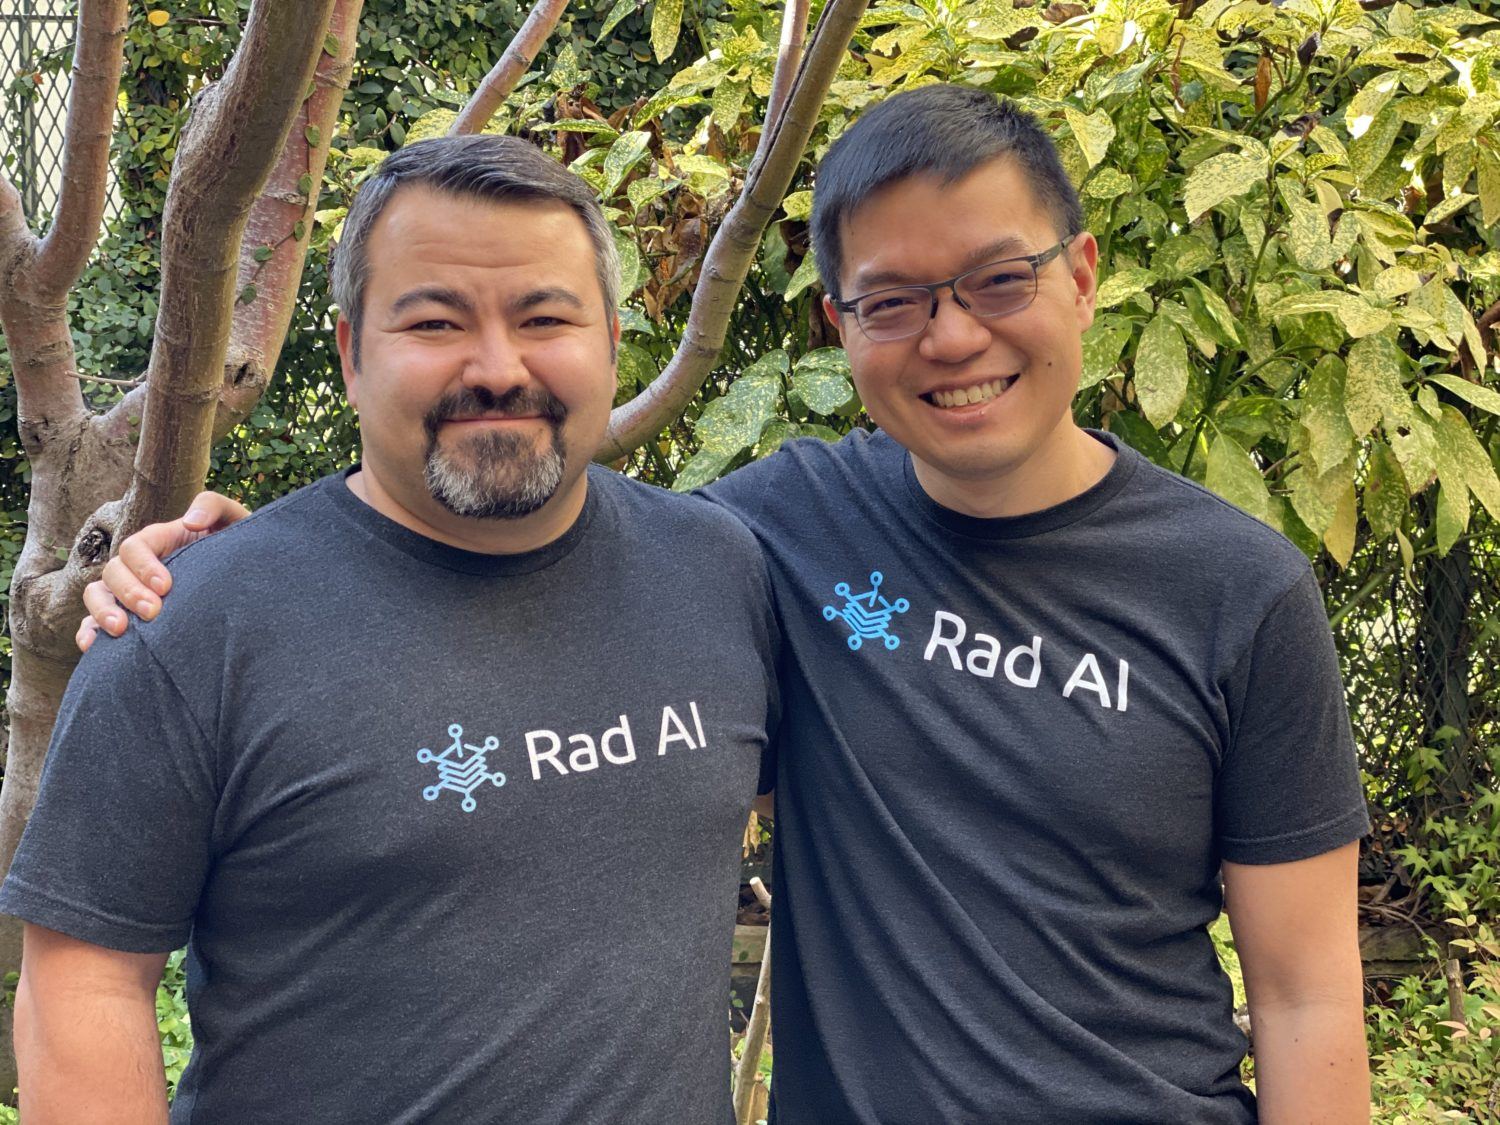 Rad AI Raises $4M to Automate Repetitive Tasks for Radiologists Through Machine Learning